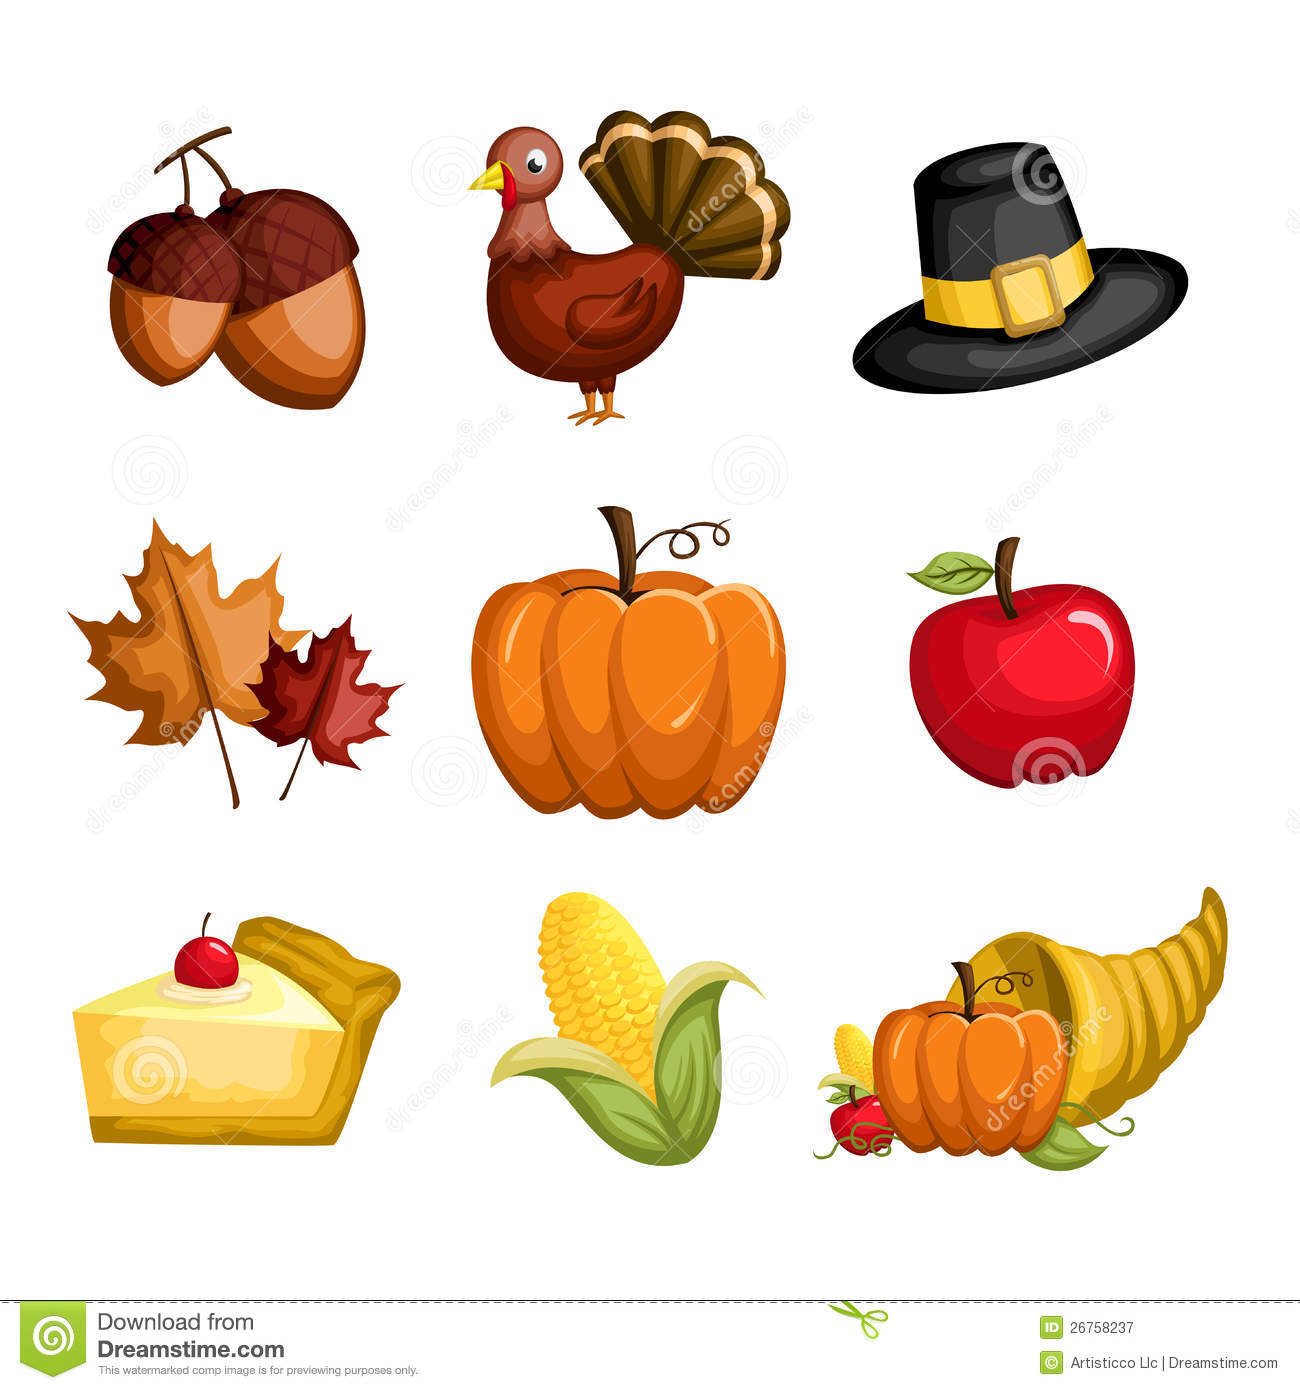 Turkey Icon For Thanksgiving
 Thanksgiving Icons Royalty Free Stock graphy Image